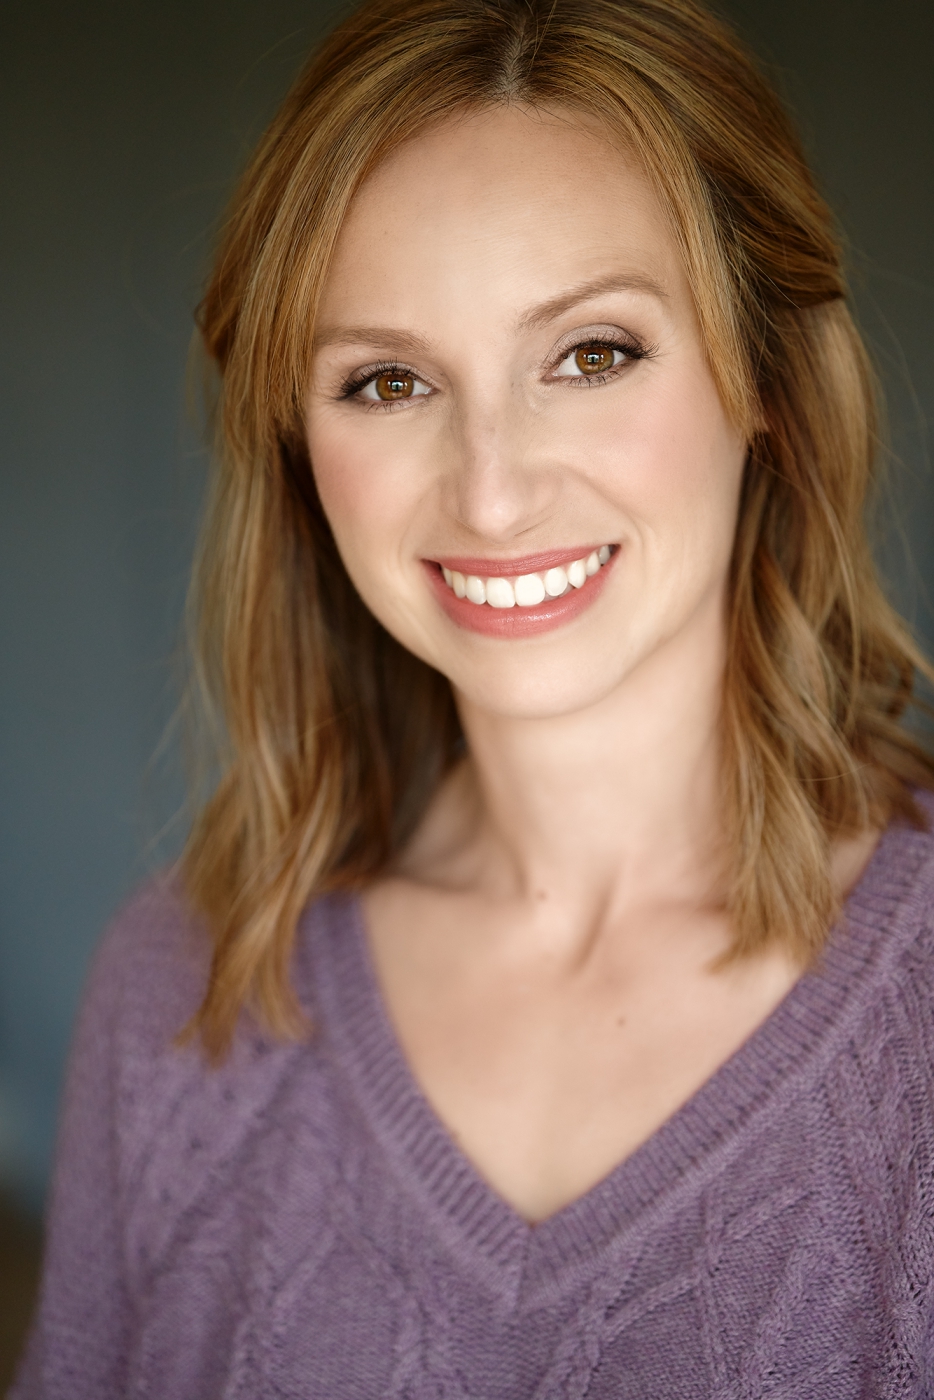 Entertainment Industry Coaching for Kids with Brooke Byler